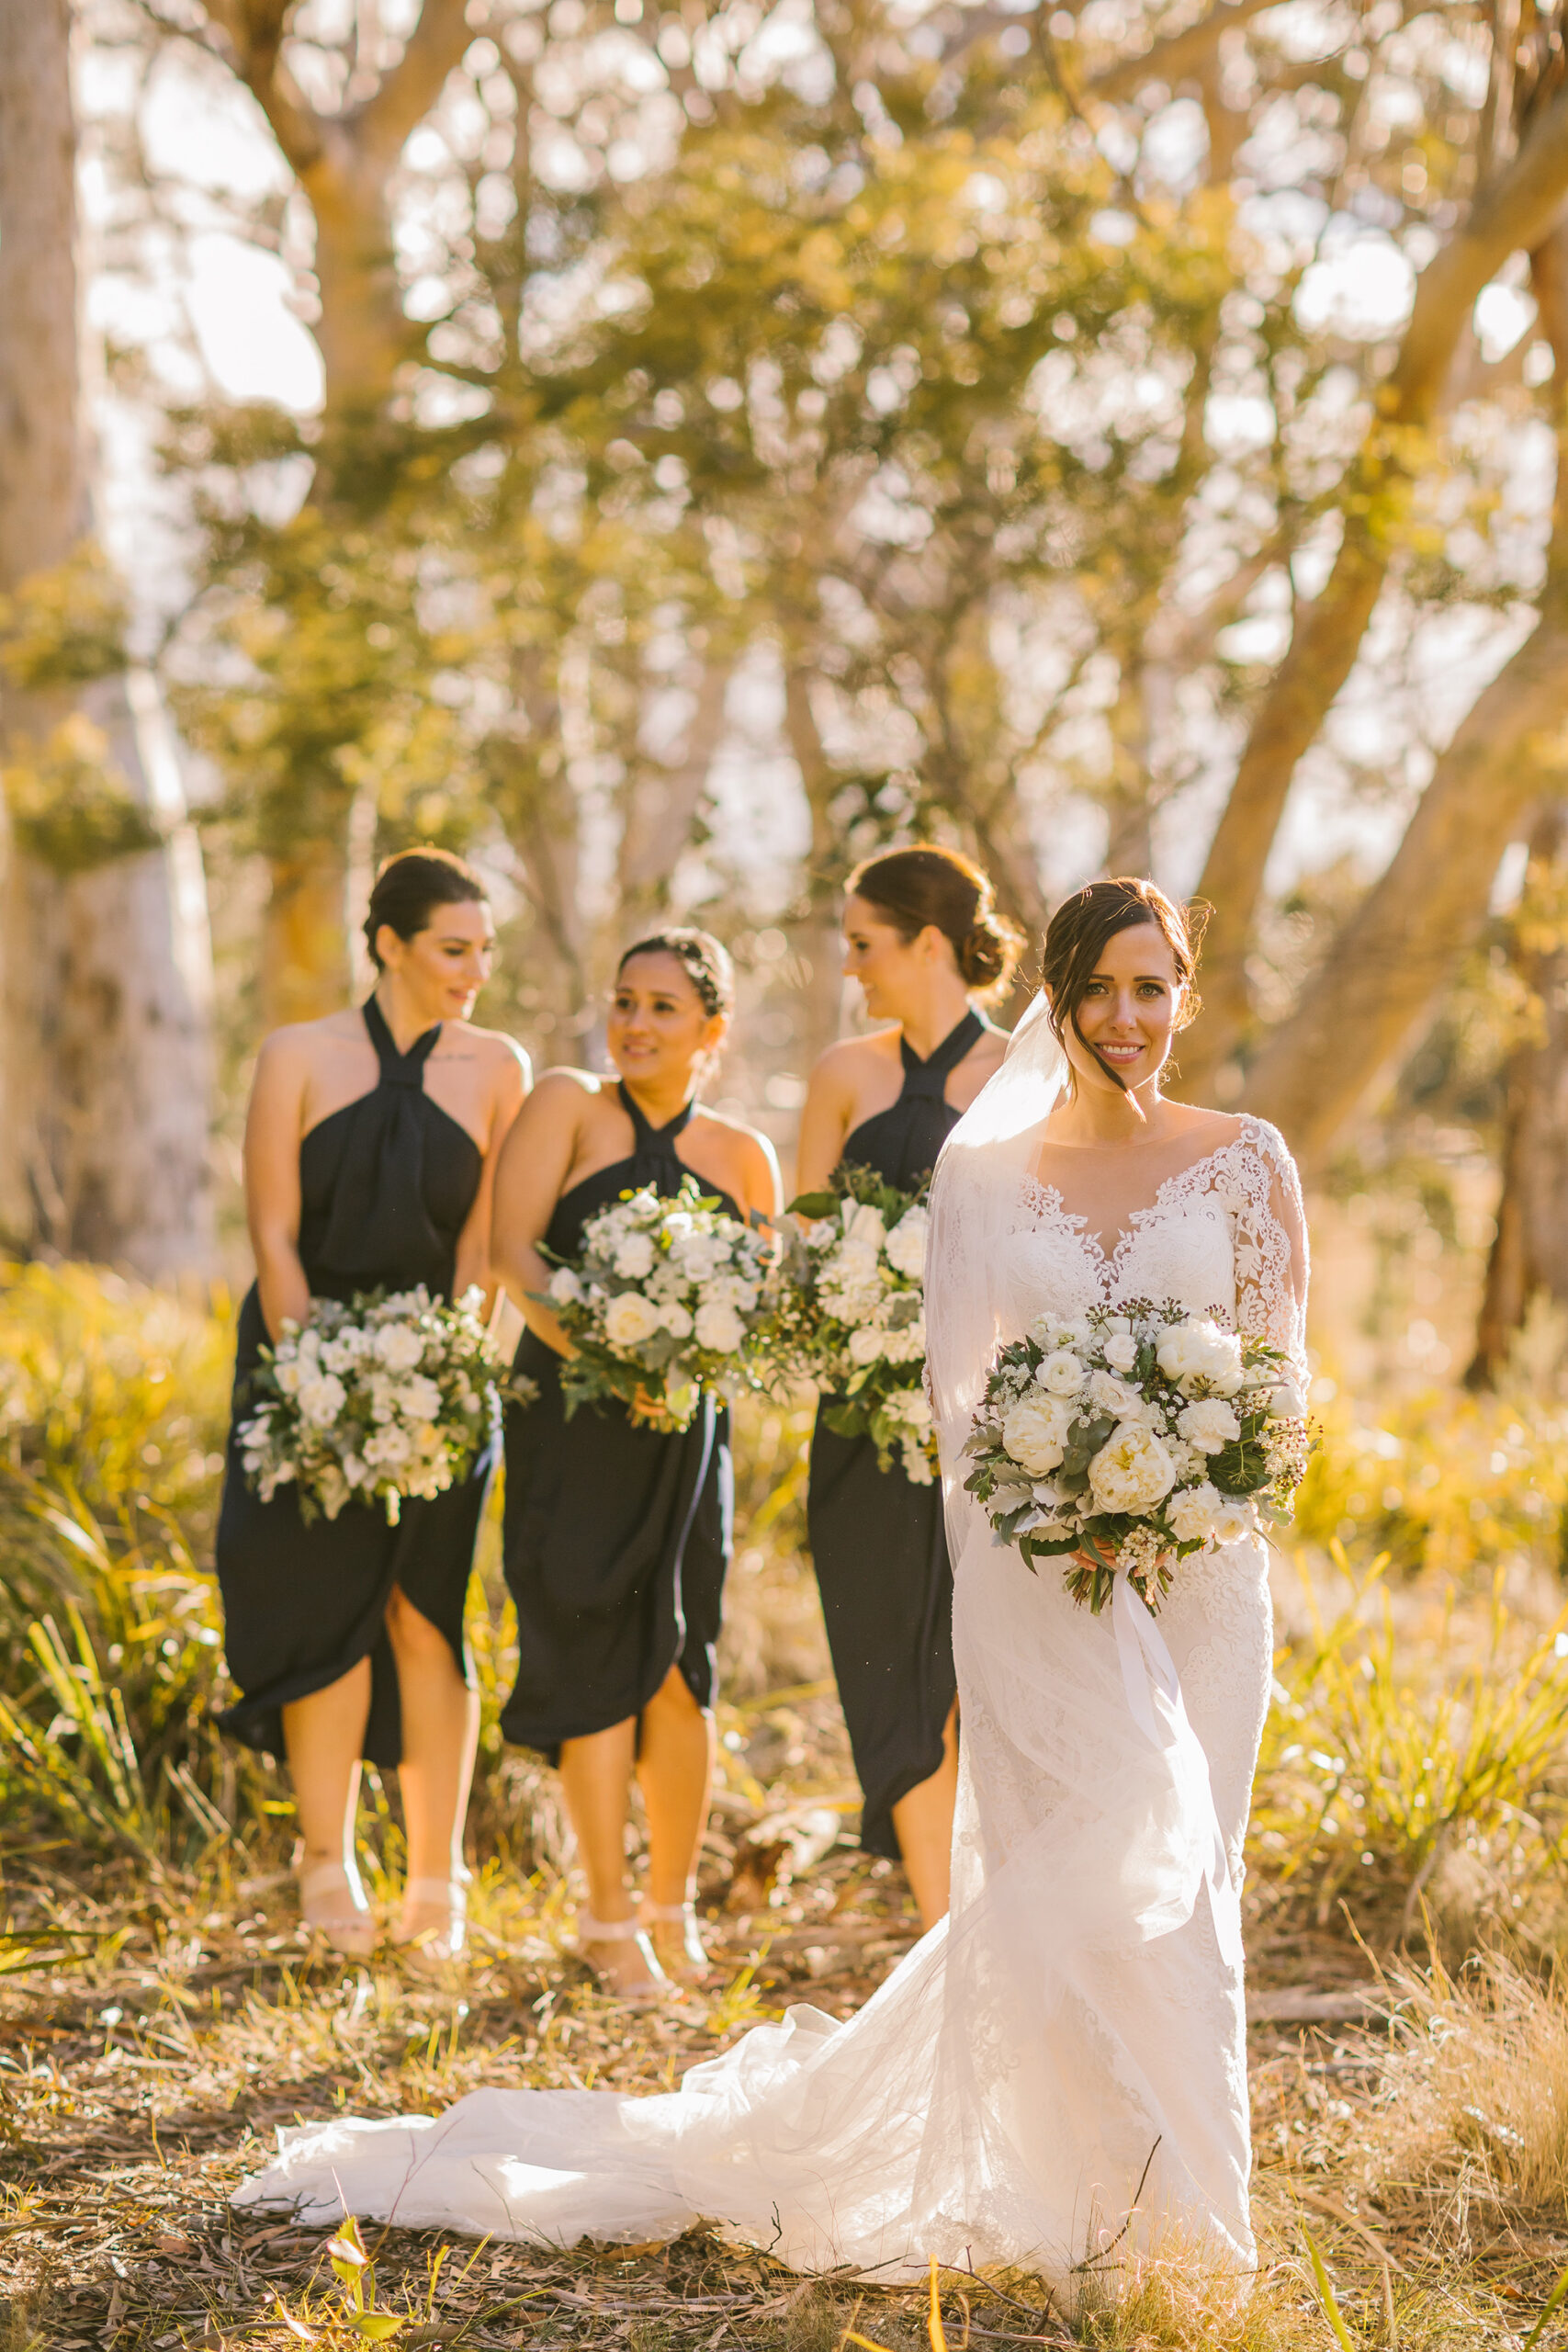 Kate Jesse Country Estate Wedding Magnus Agren Photography SBS 021 scaled